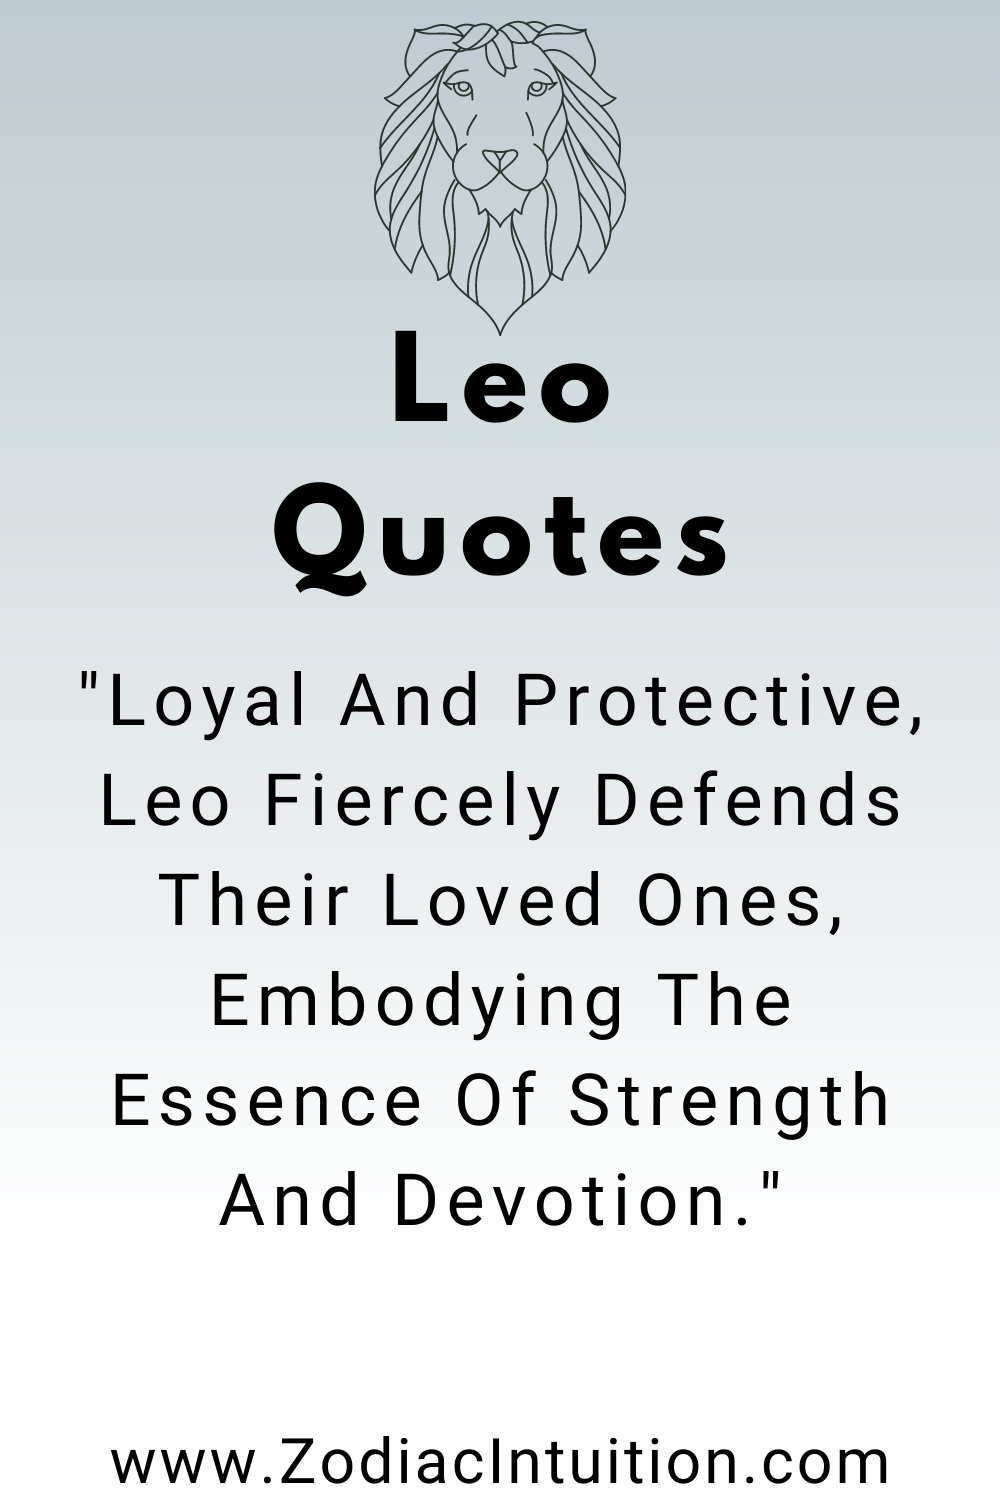 Top 5 Leo Quotes And Inspiration